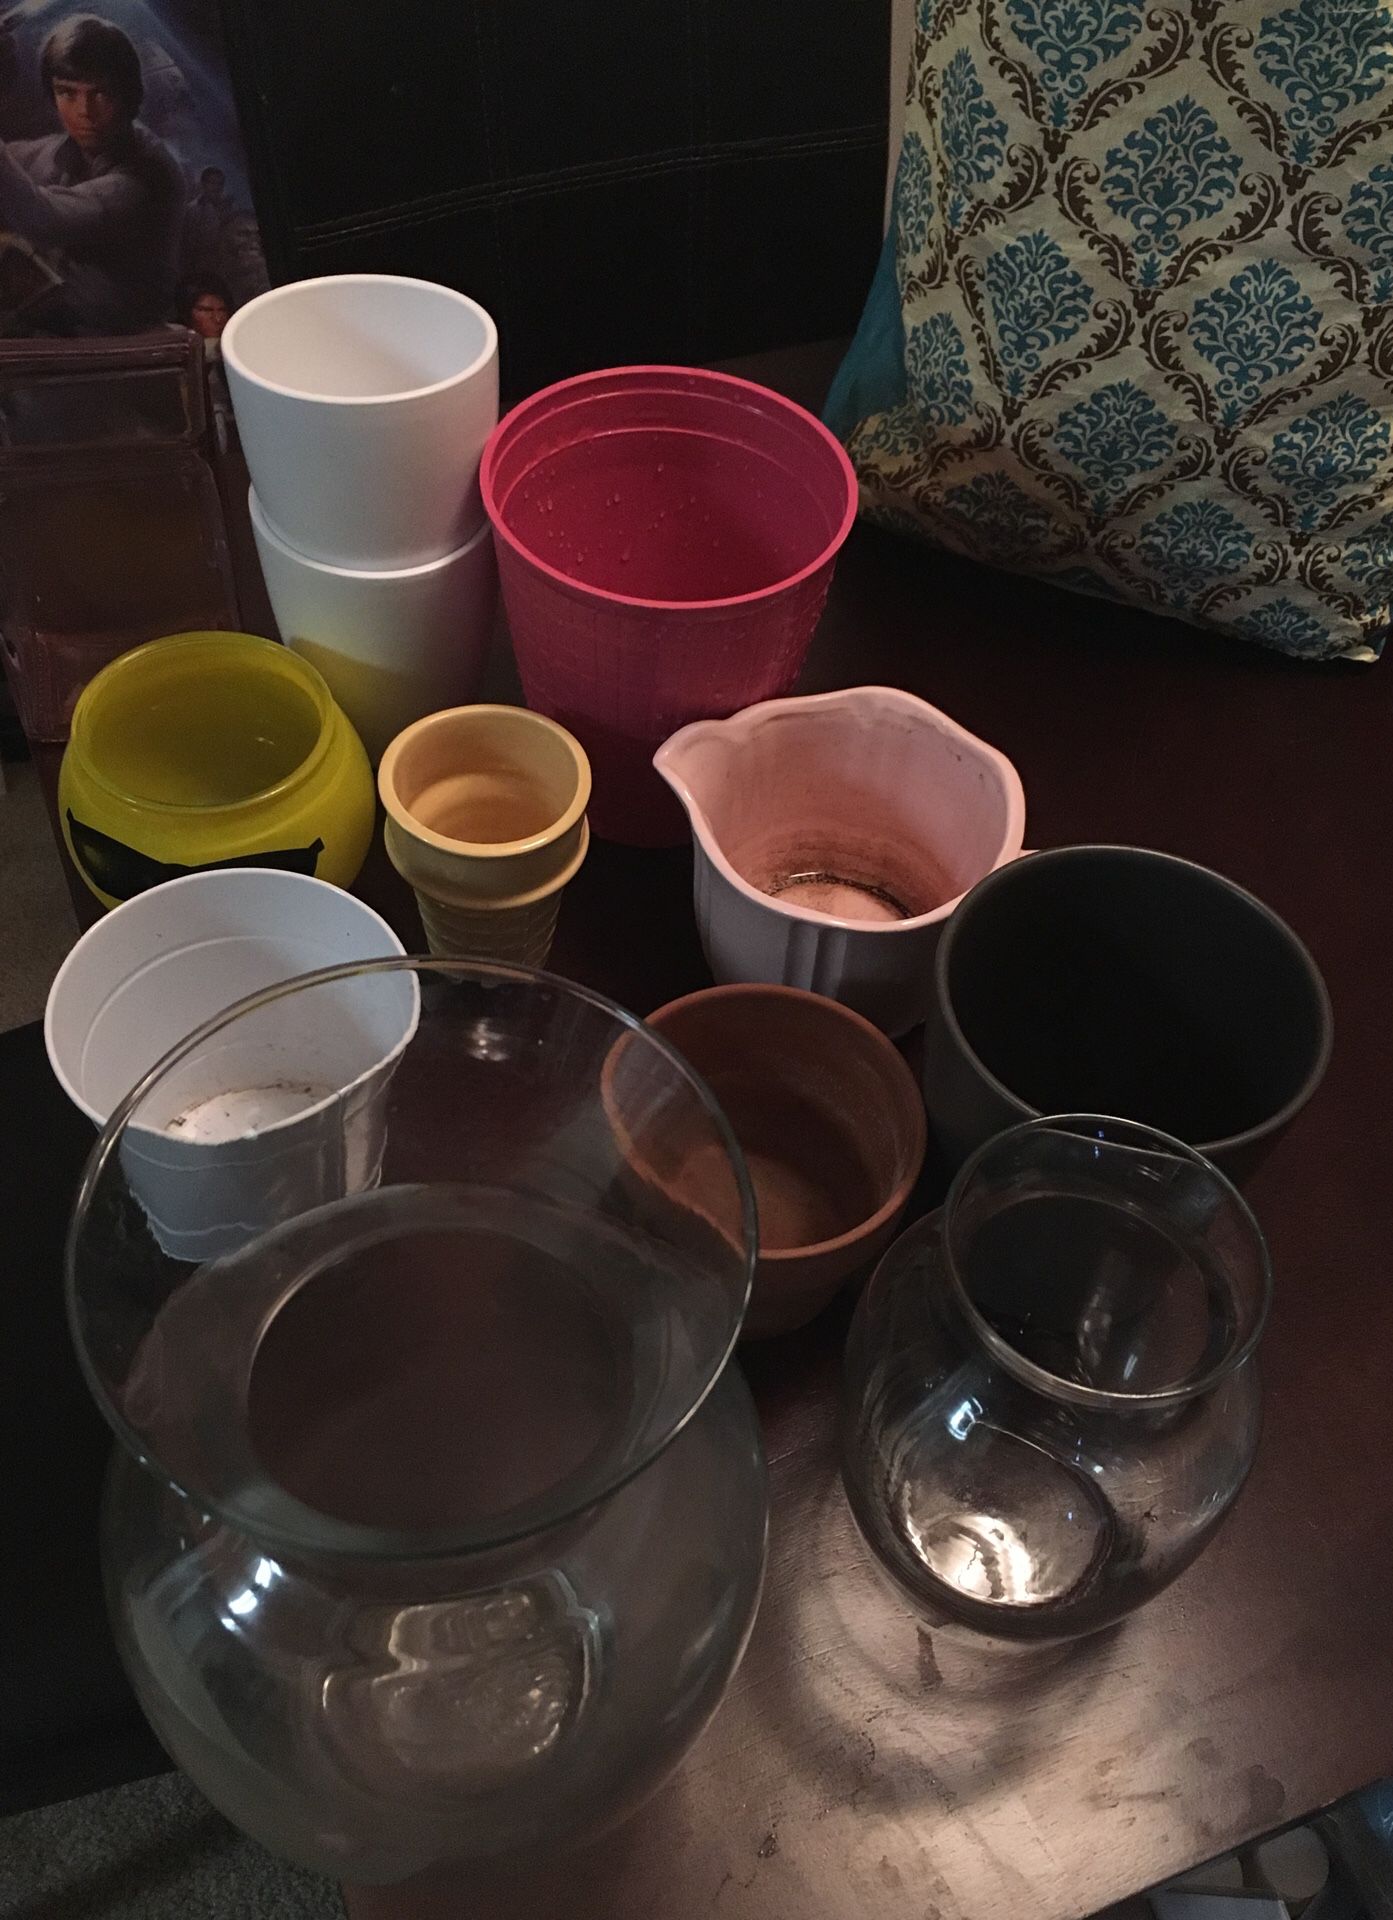 Lot of 12 flower pots and vases